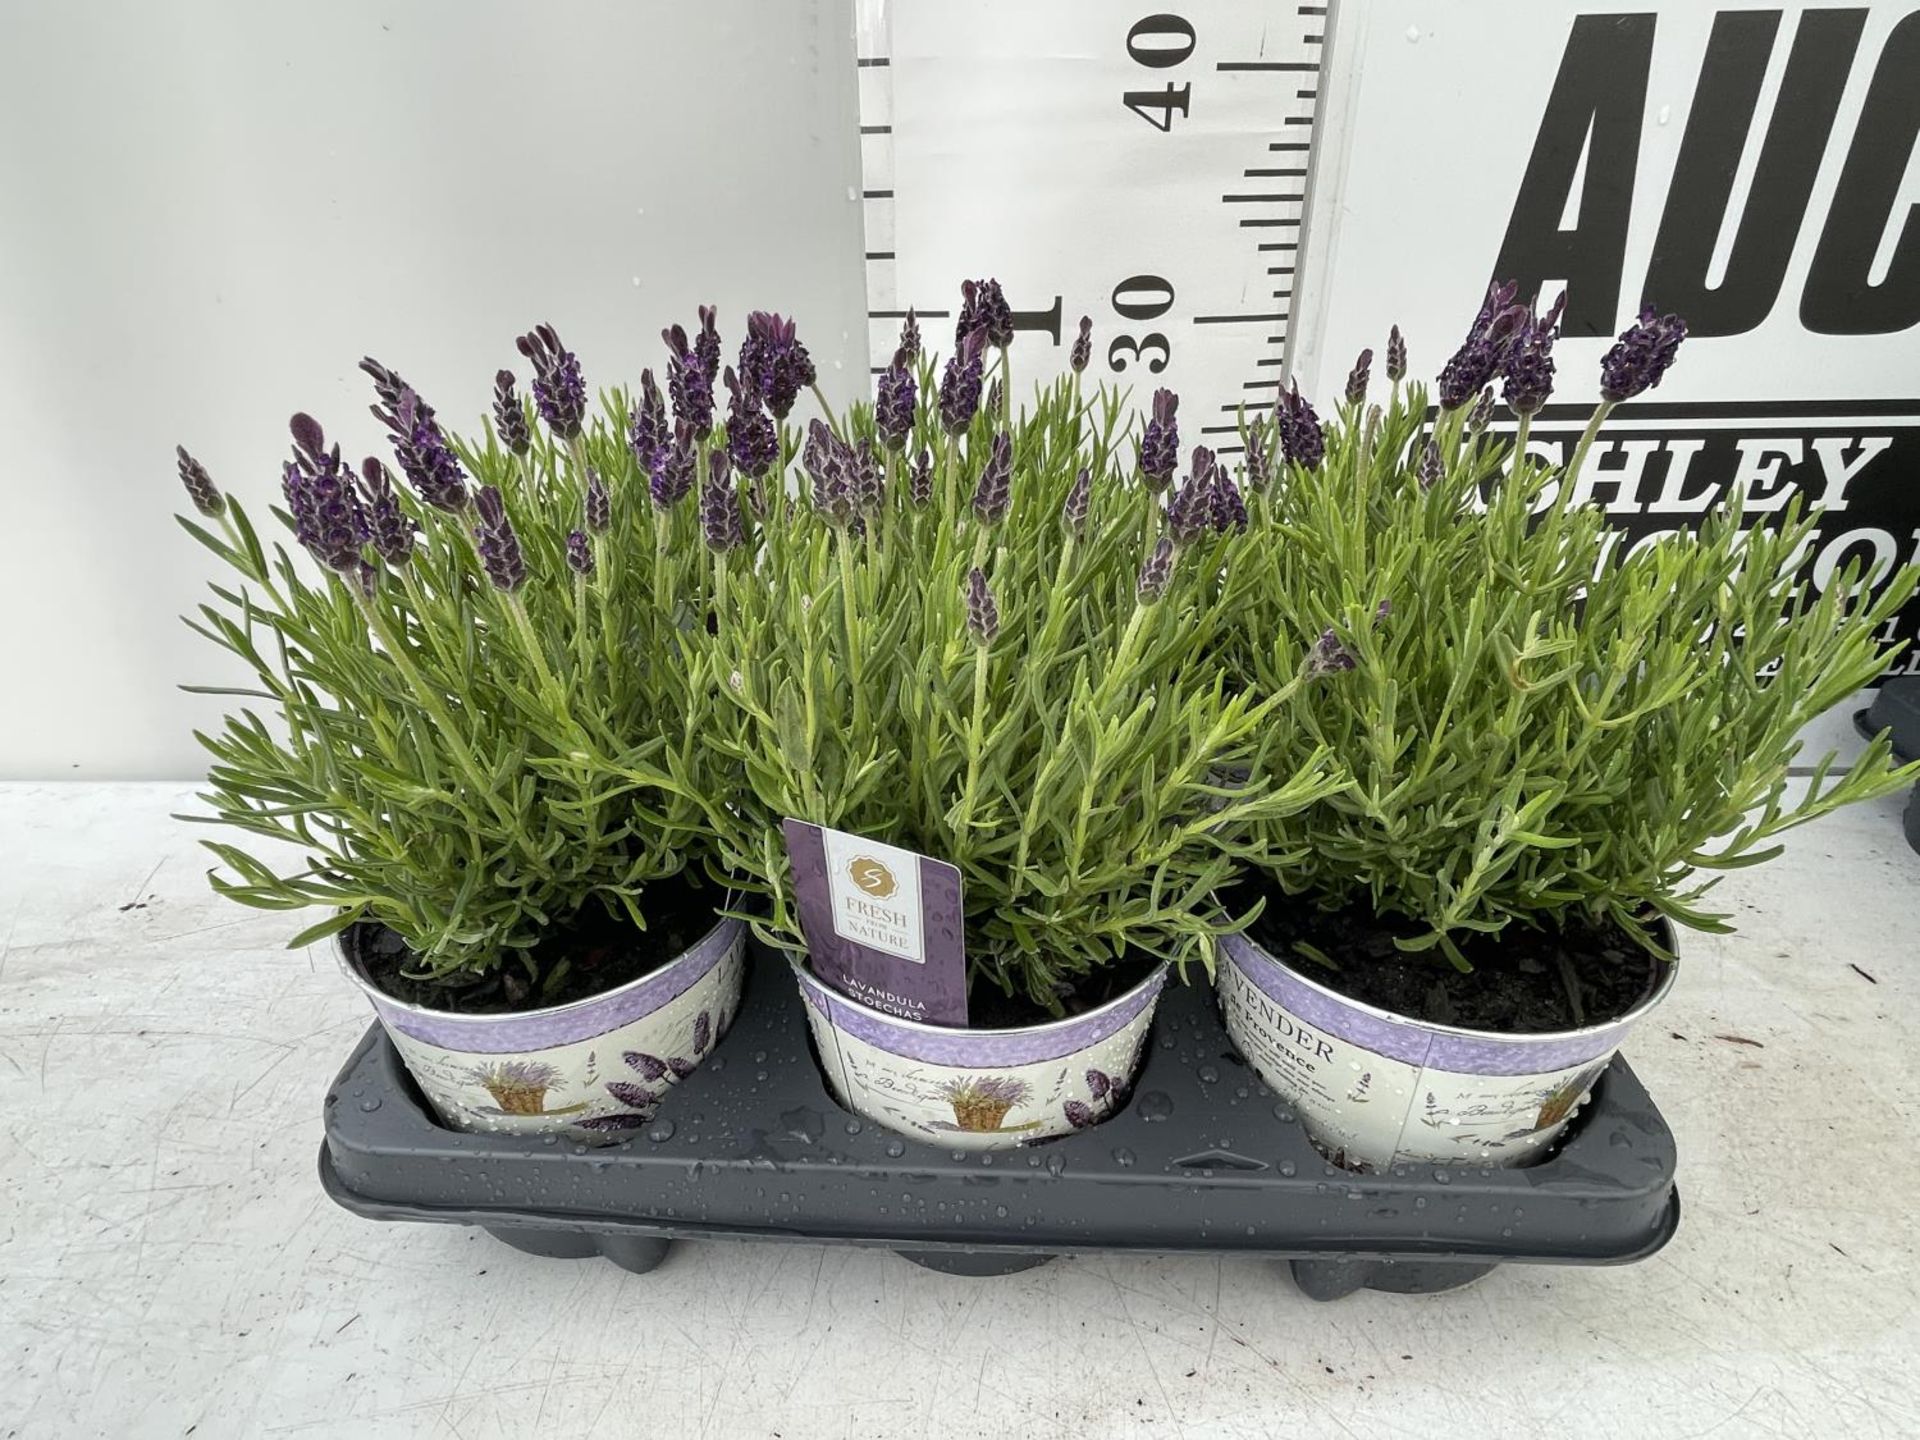 SIX LAVENDULA ST ANOUK COLLECTION IN DECORATIVE METAL POTS TO BE SOLD FOR THE SIX NO VAT